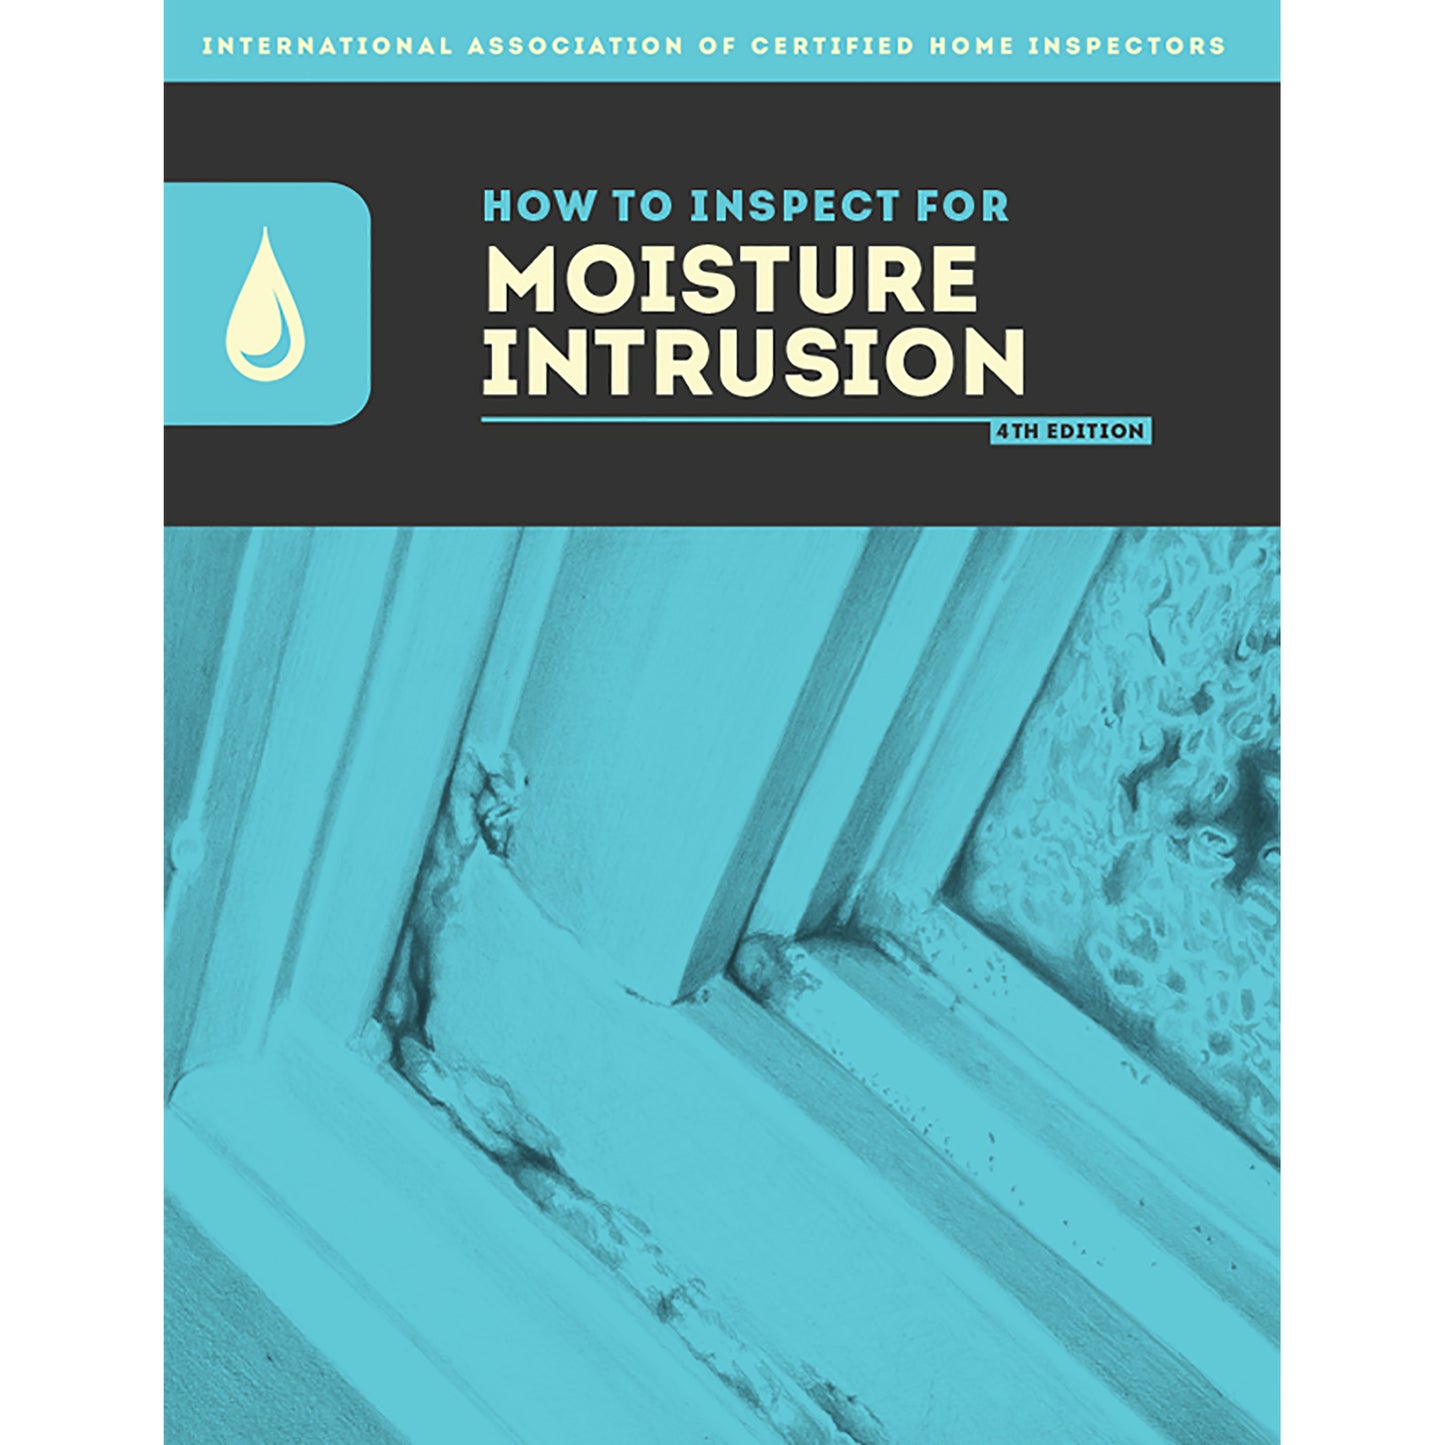 How to Inspect for Moisture Intrusion PDF Download